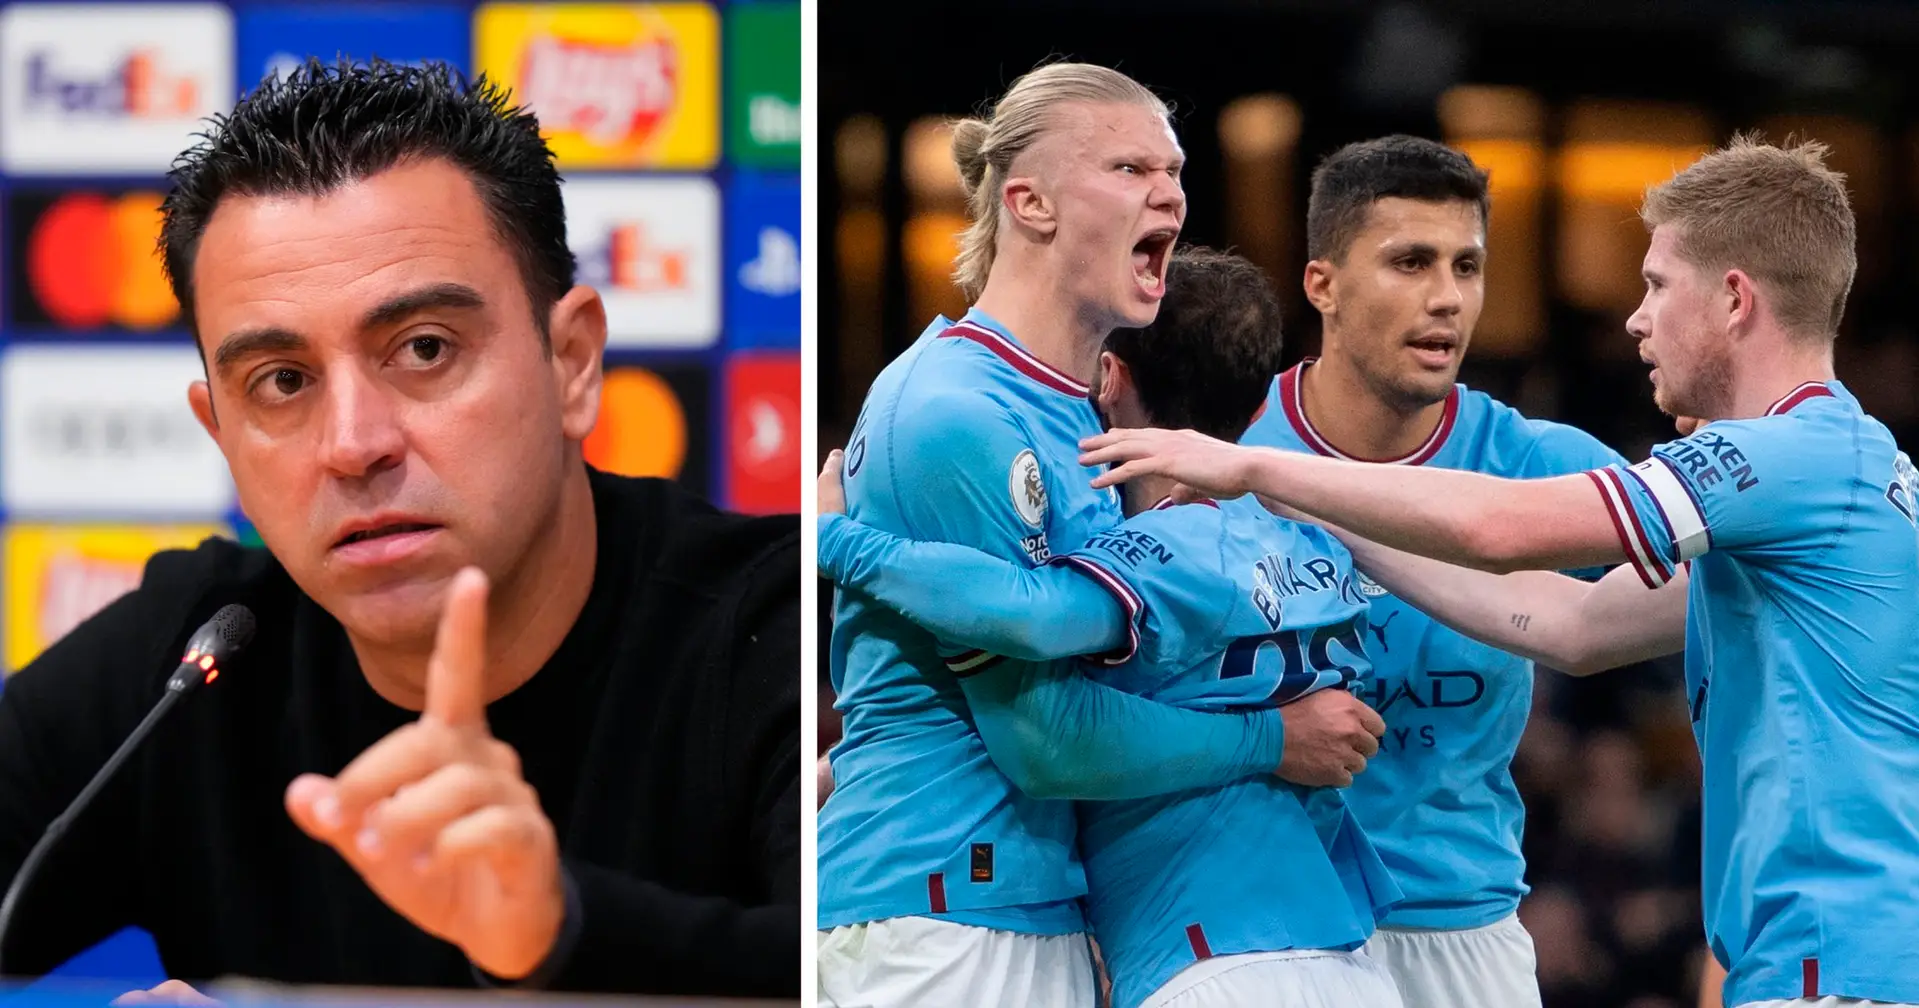 Barca fan reveals his dream big signing - he is currently playing for Man City 